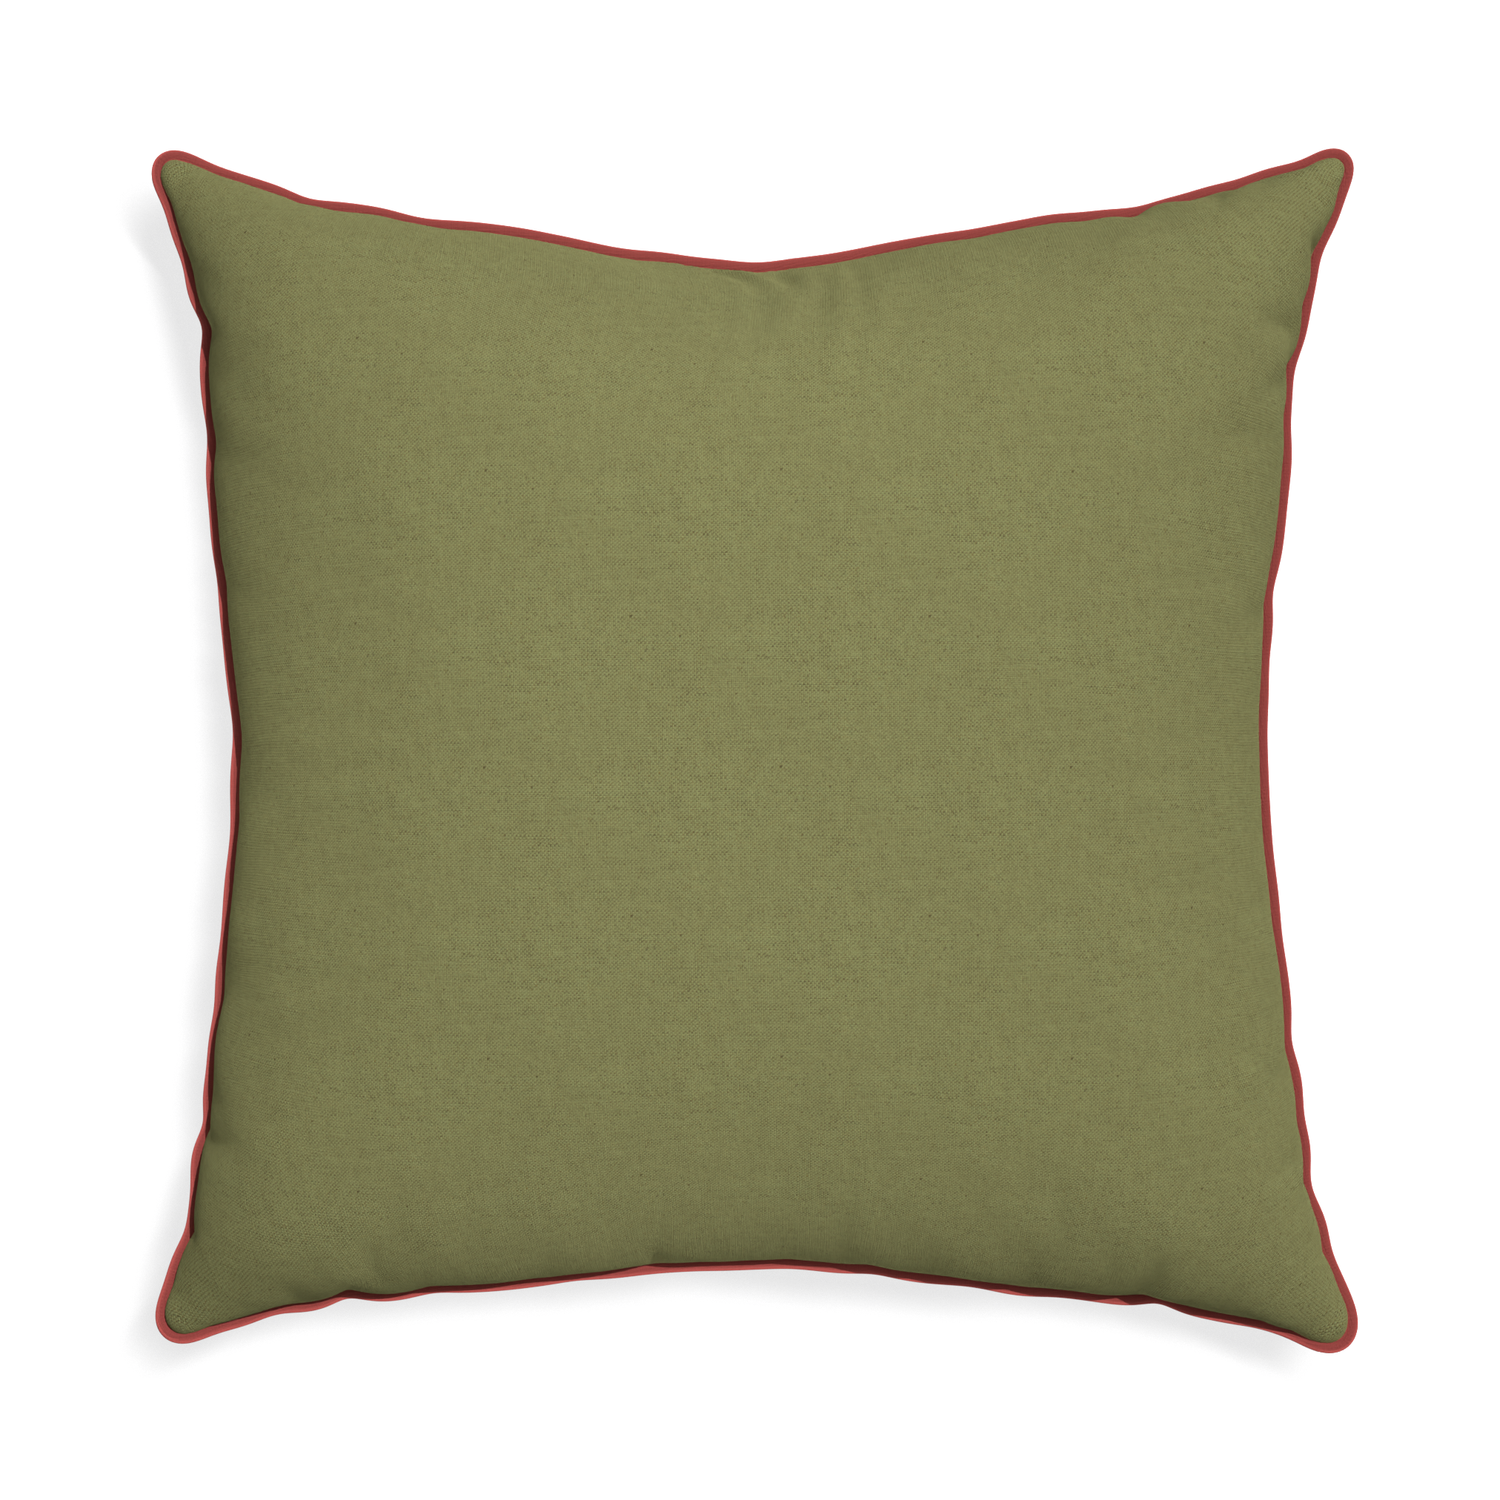 Euro-sham moss custom moss greenpillow with c piping on white background